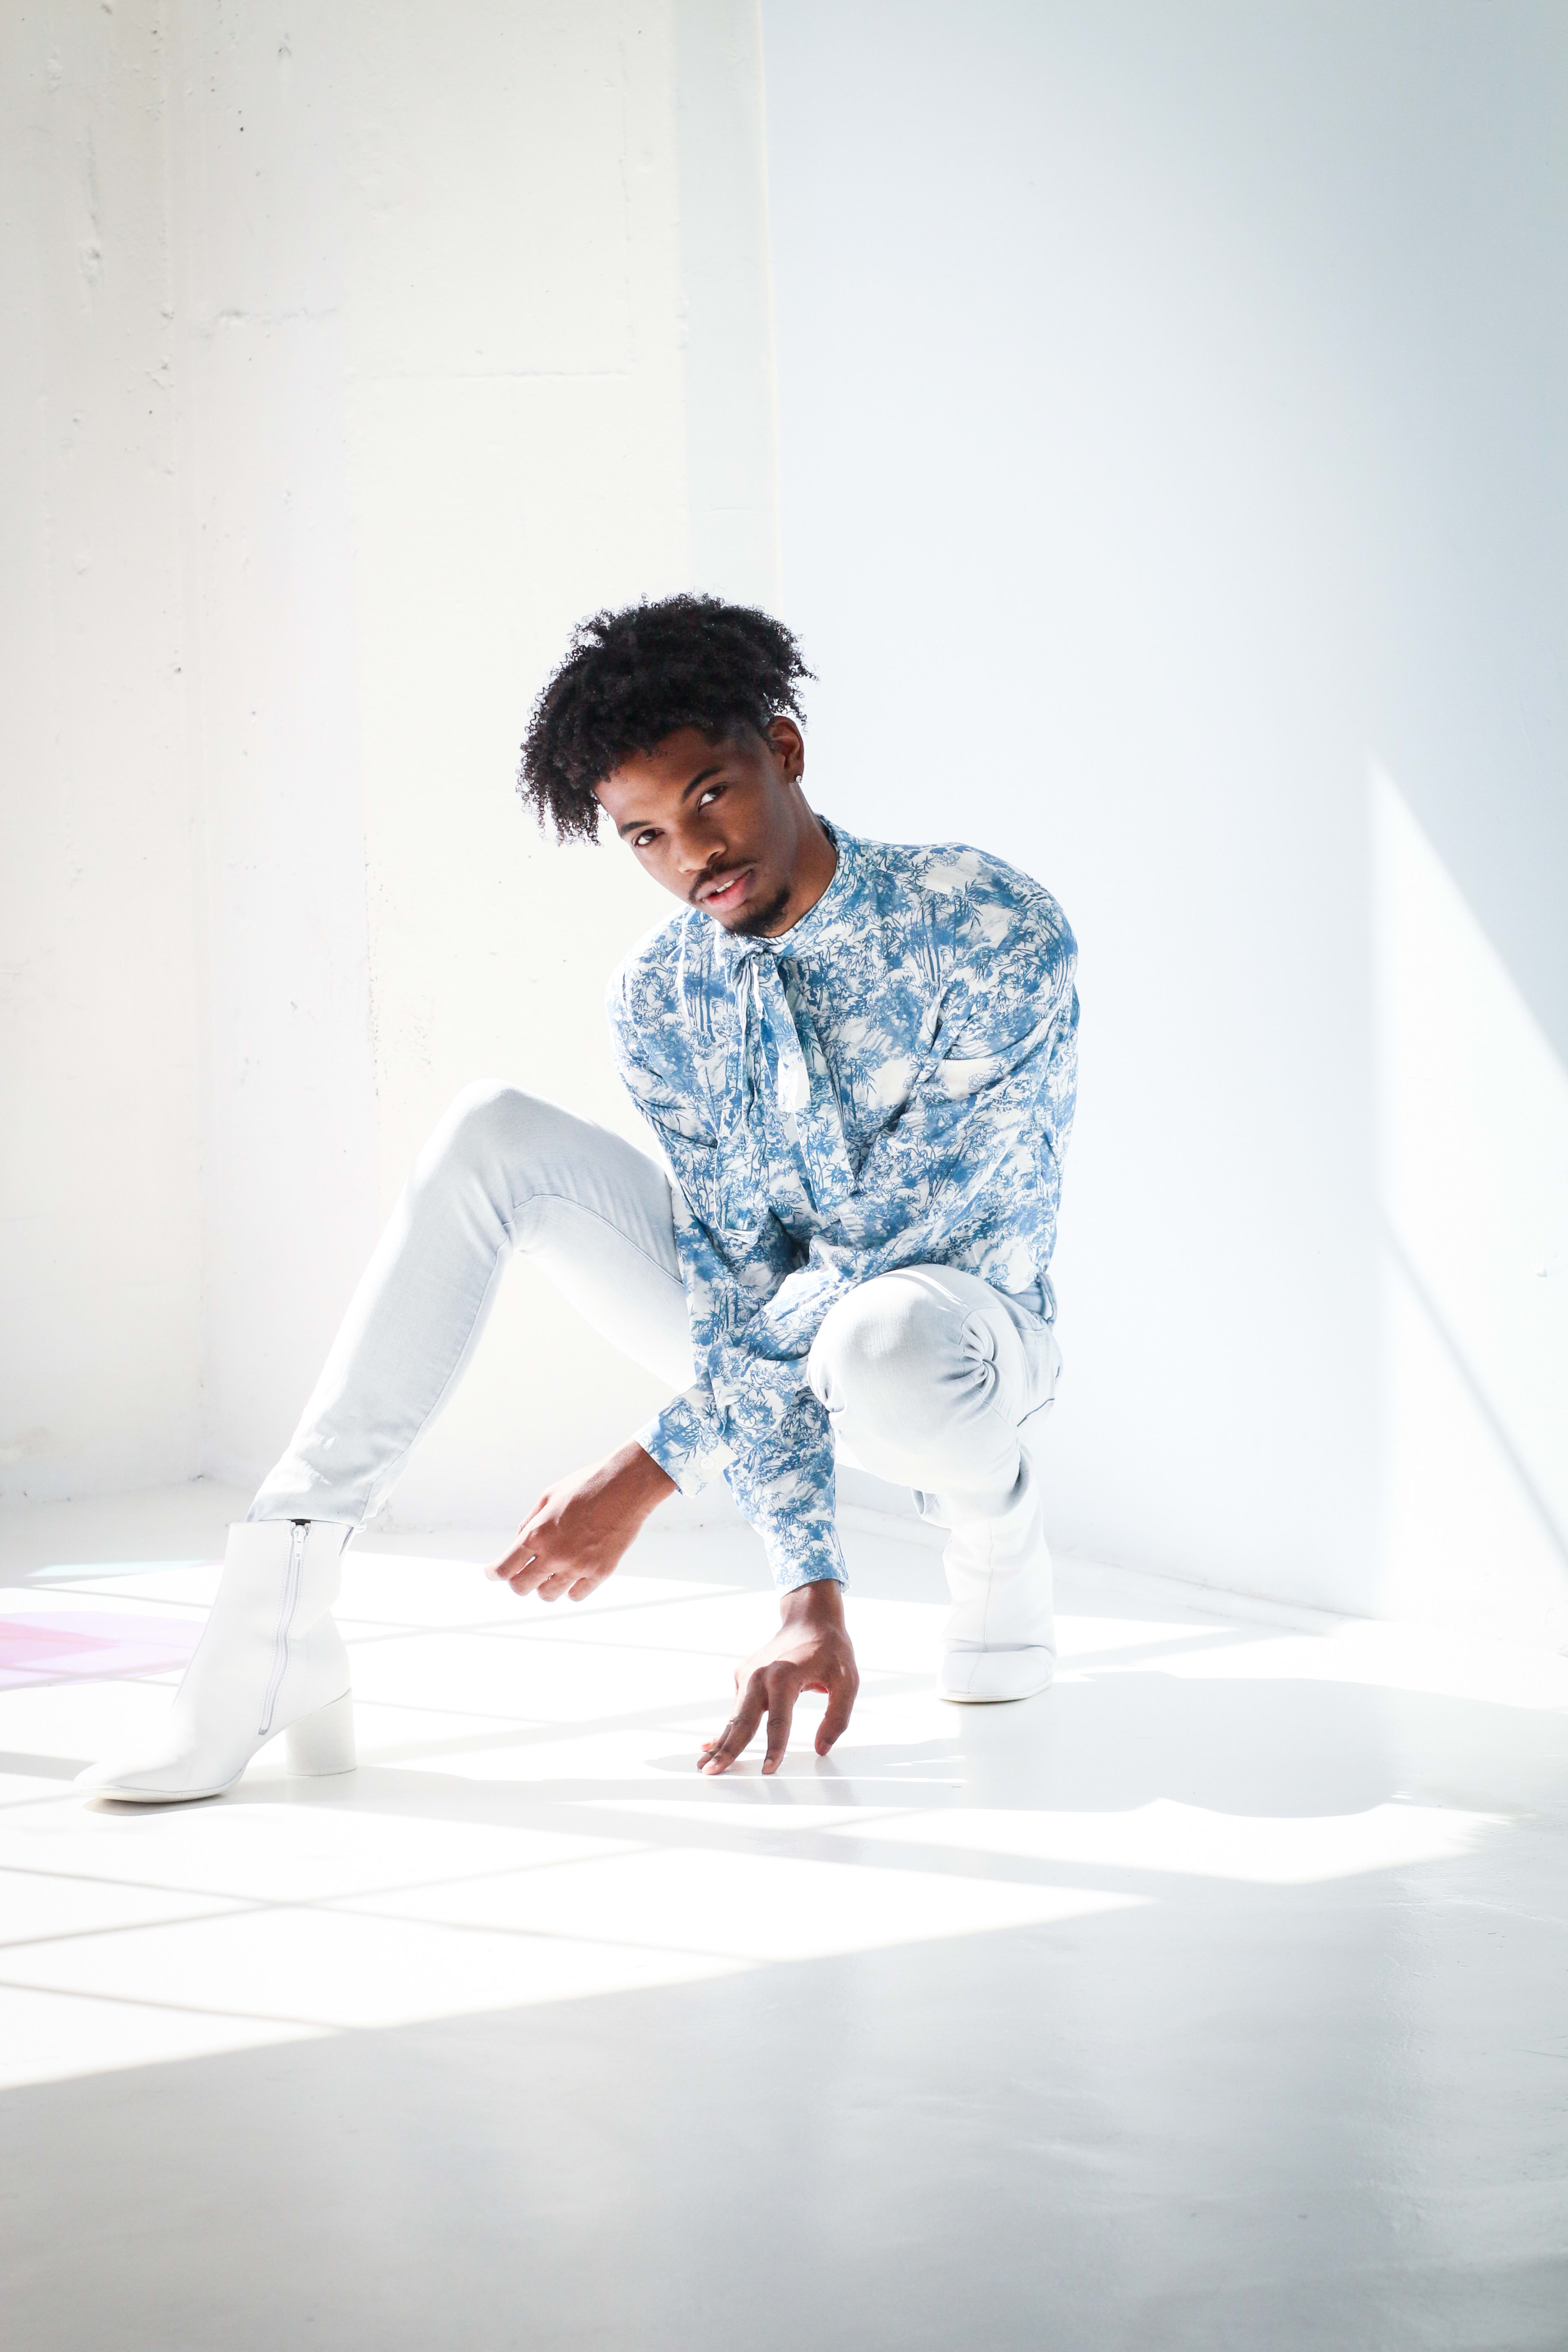 A fashion photoshoot featuring a man in blue shirt and white pants.